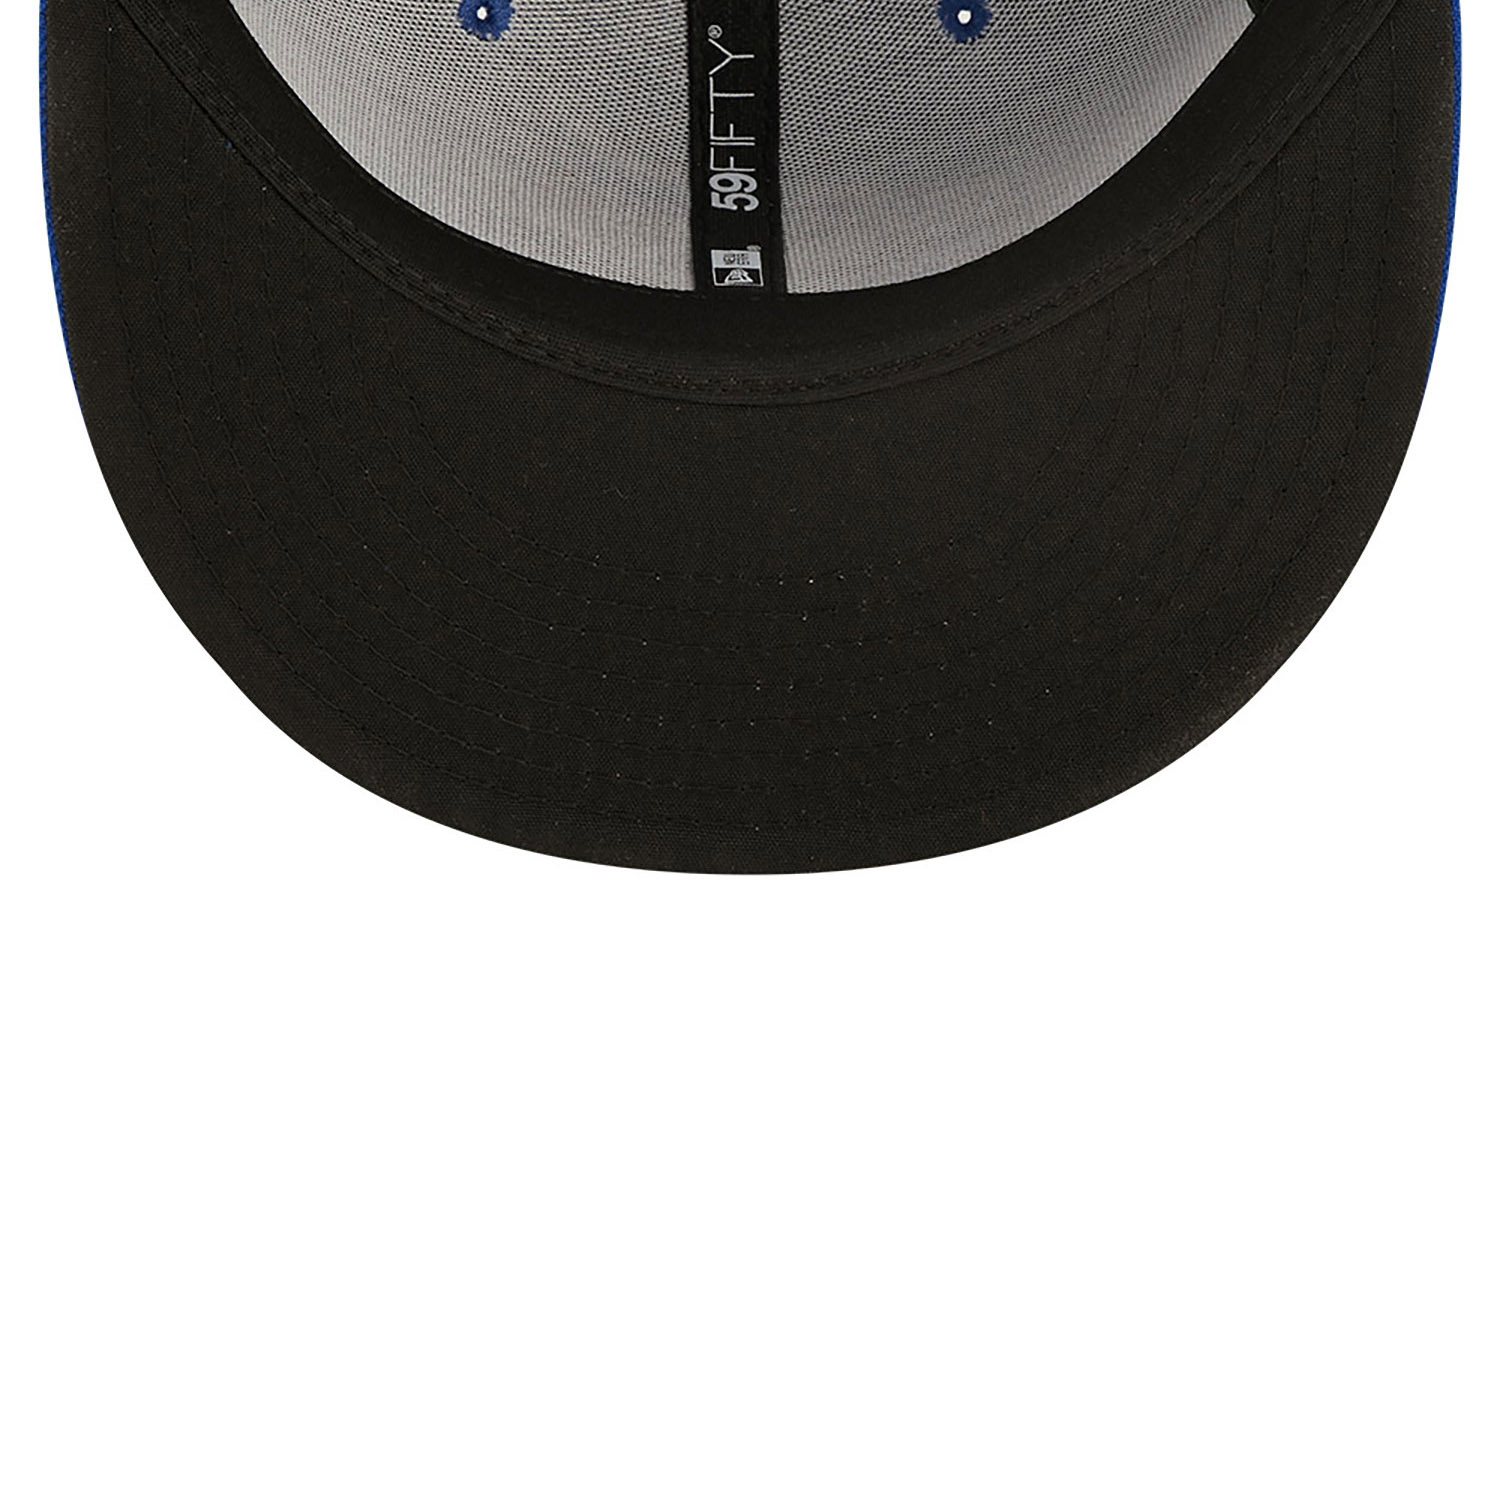 Toronto Blue Jays MLB Blue 59FIFTY Fitted Cap